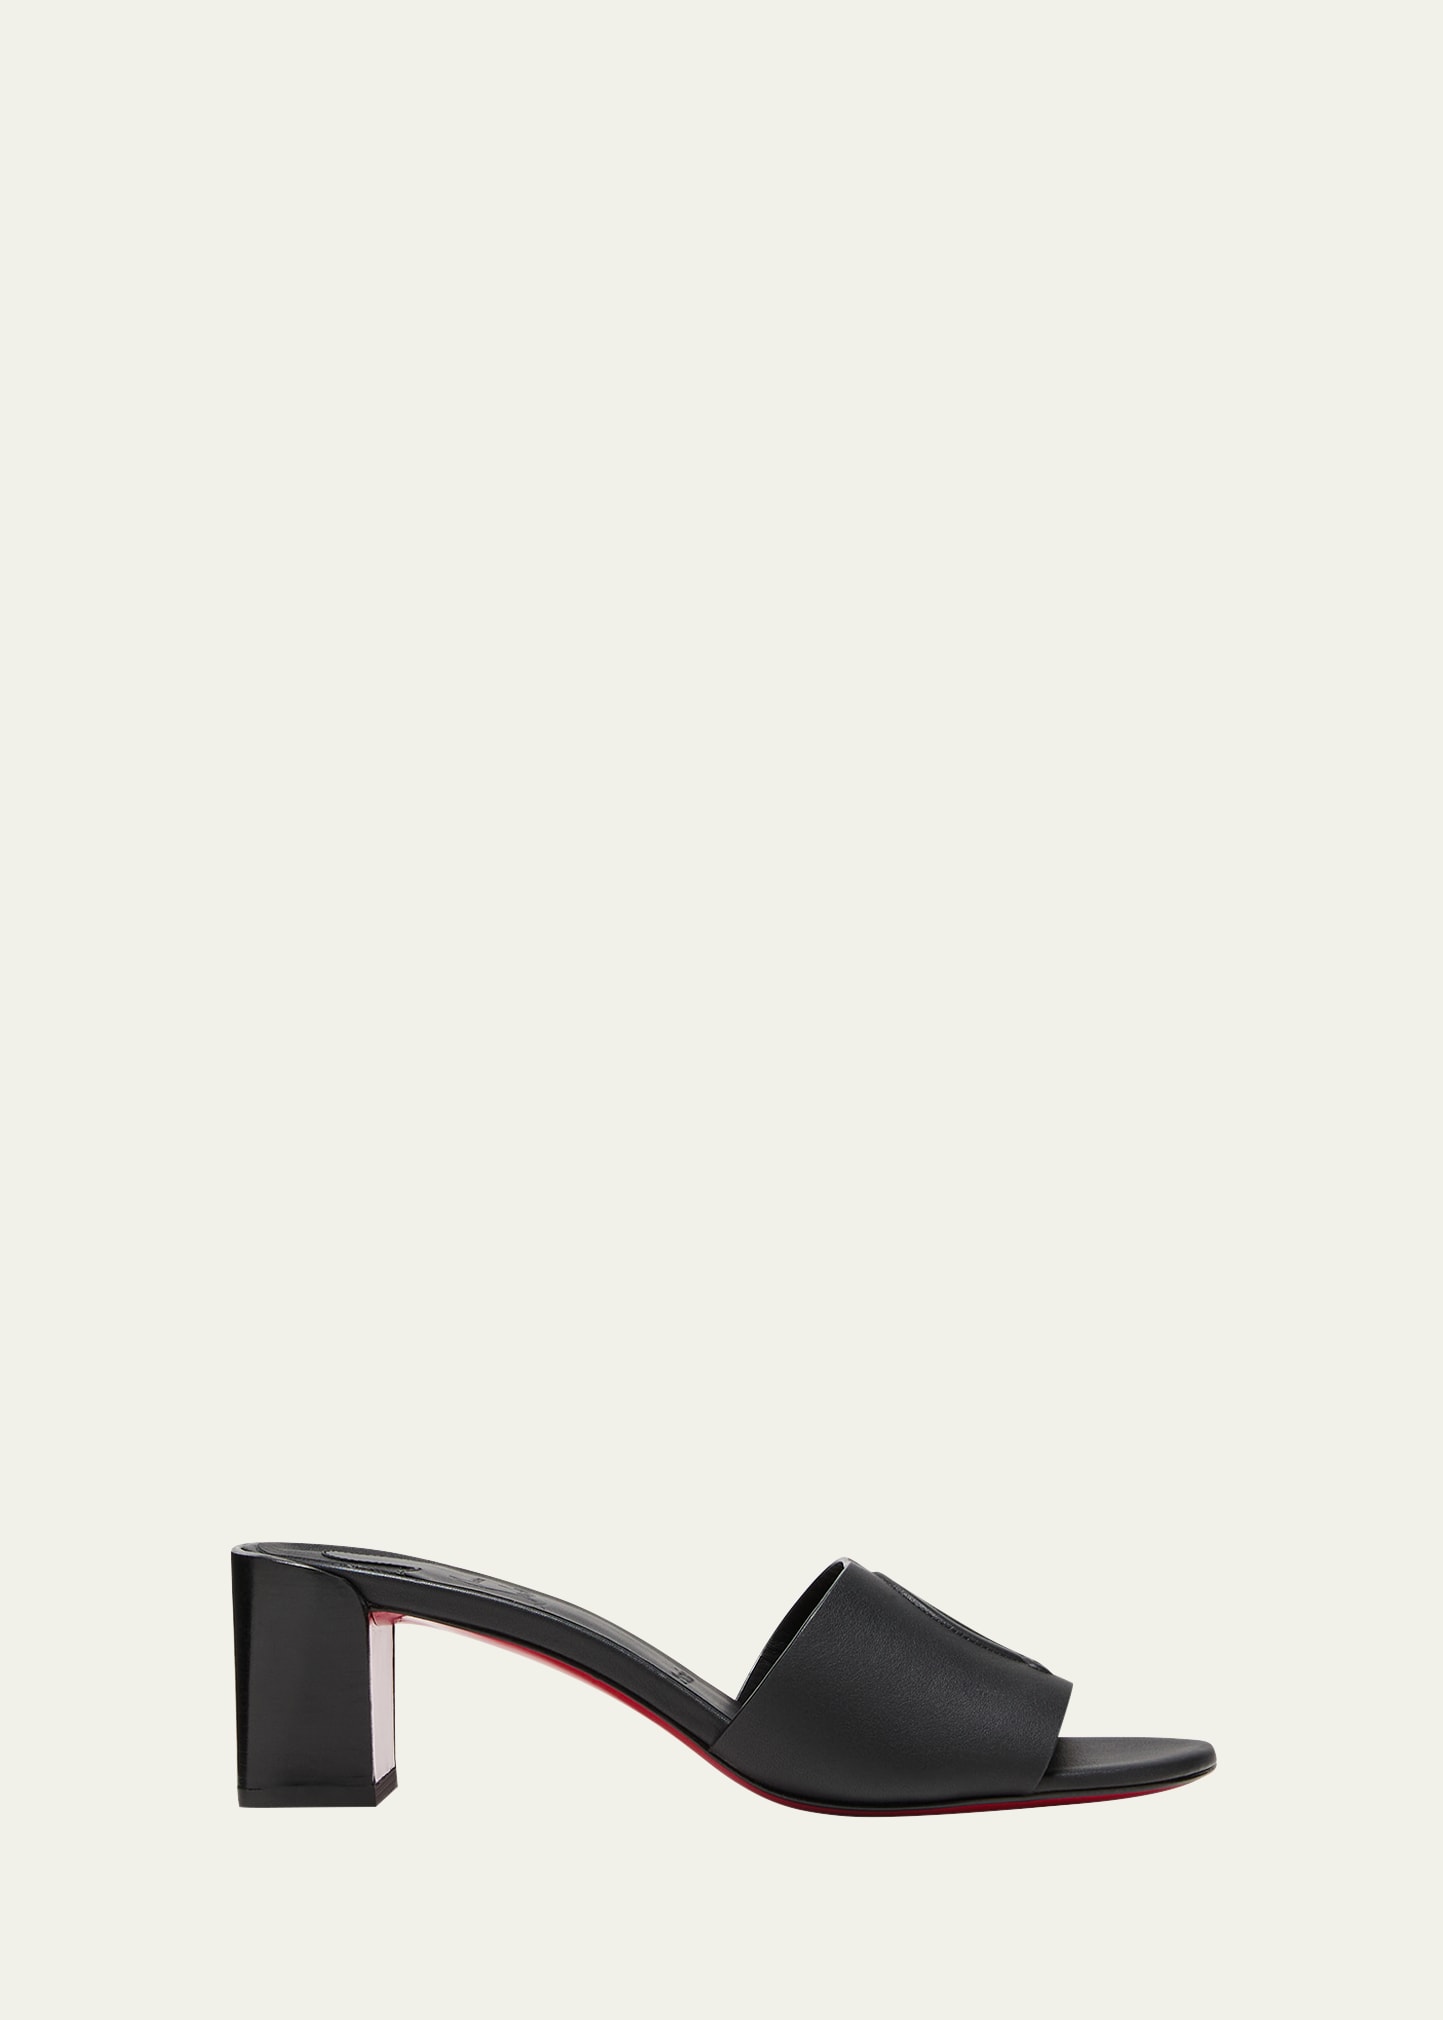 Christian Louboutin Leather Logo Red Sole Mule Sandals In Black